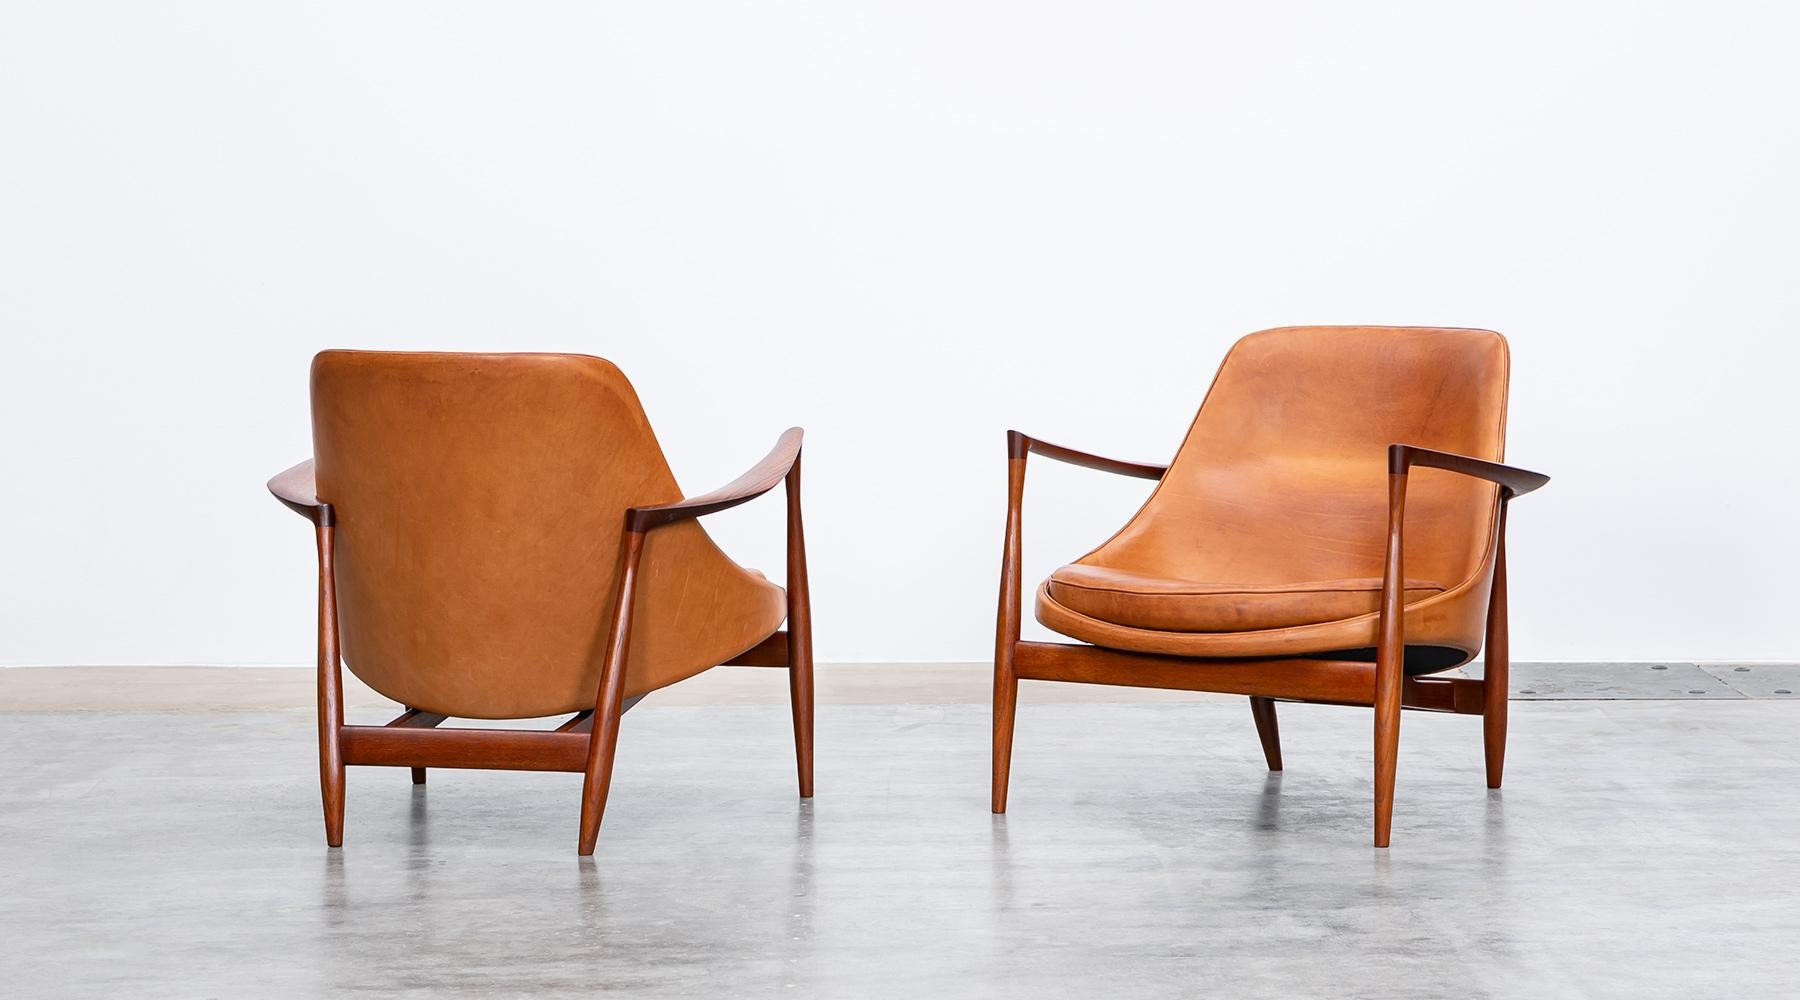 Matching pair of lounge chairs, teak, leather, Denmark, 1956.

Wonderful examples of Ib Kofod-Larsen lounge chairs in teak with amazing patinated cognac leather. The lounge chairs were created in 1956 and are in perfect condition. Manufactured by